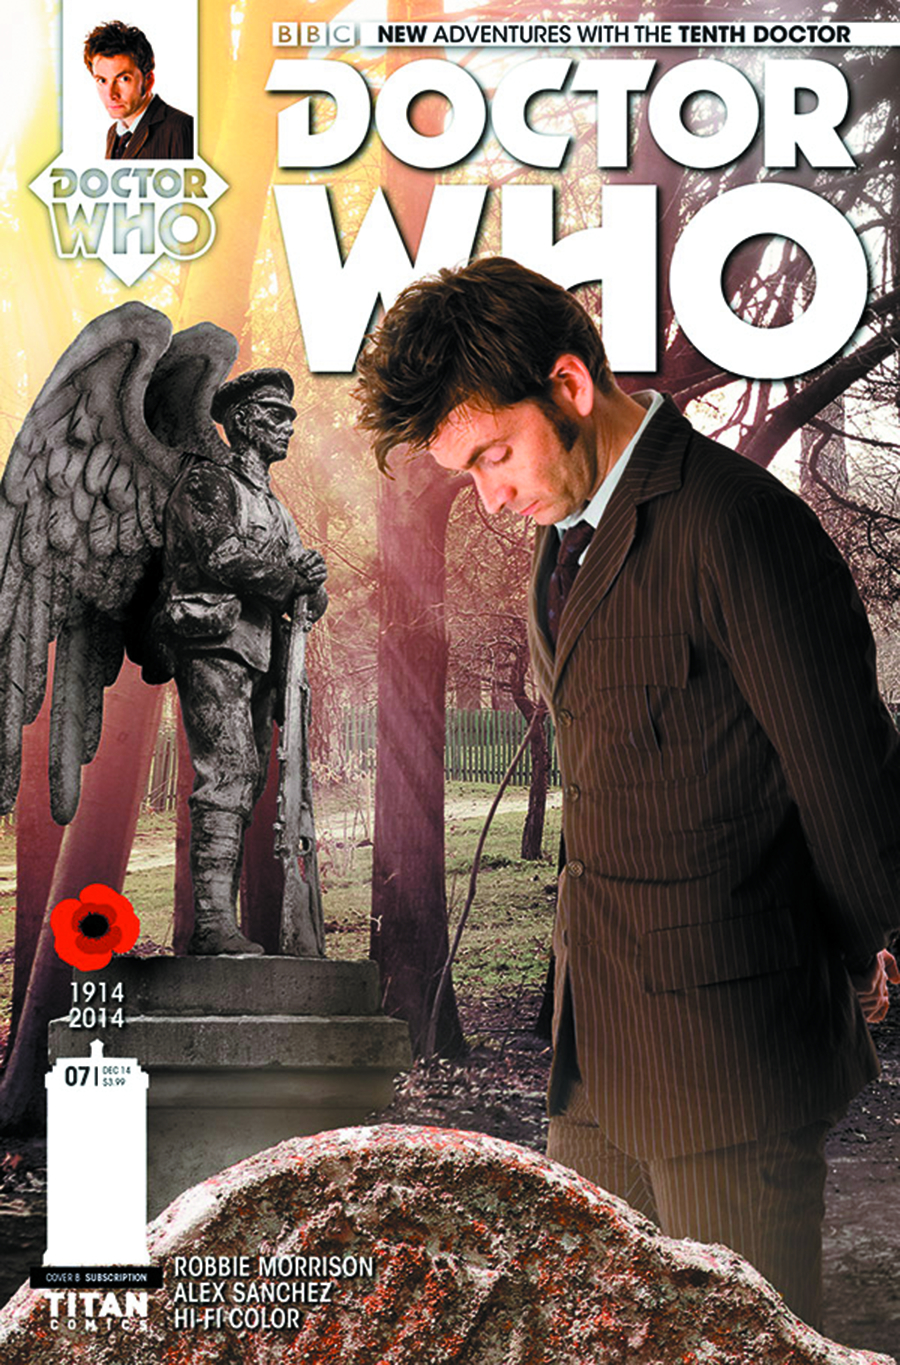 DOCTOR WHO 10TH #7 SUBSCRIPTION PHOTO